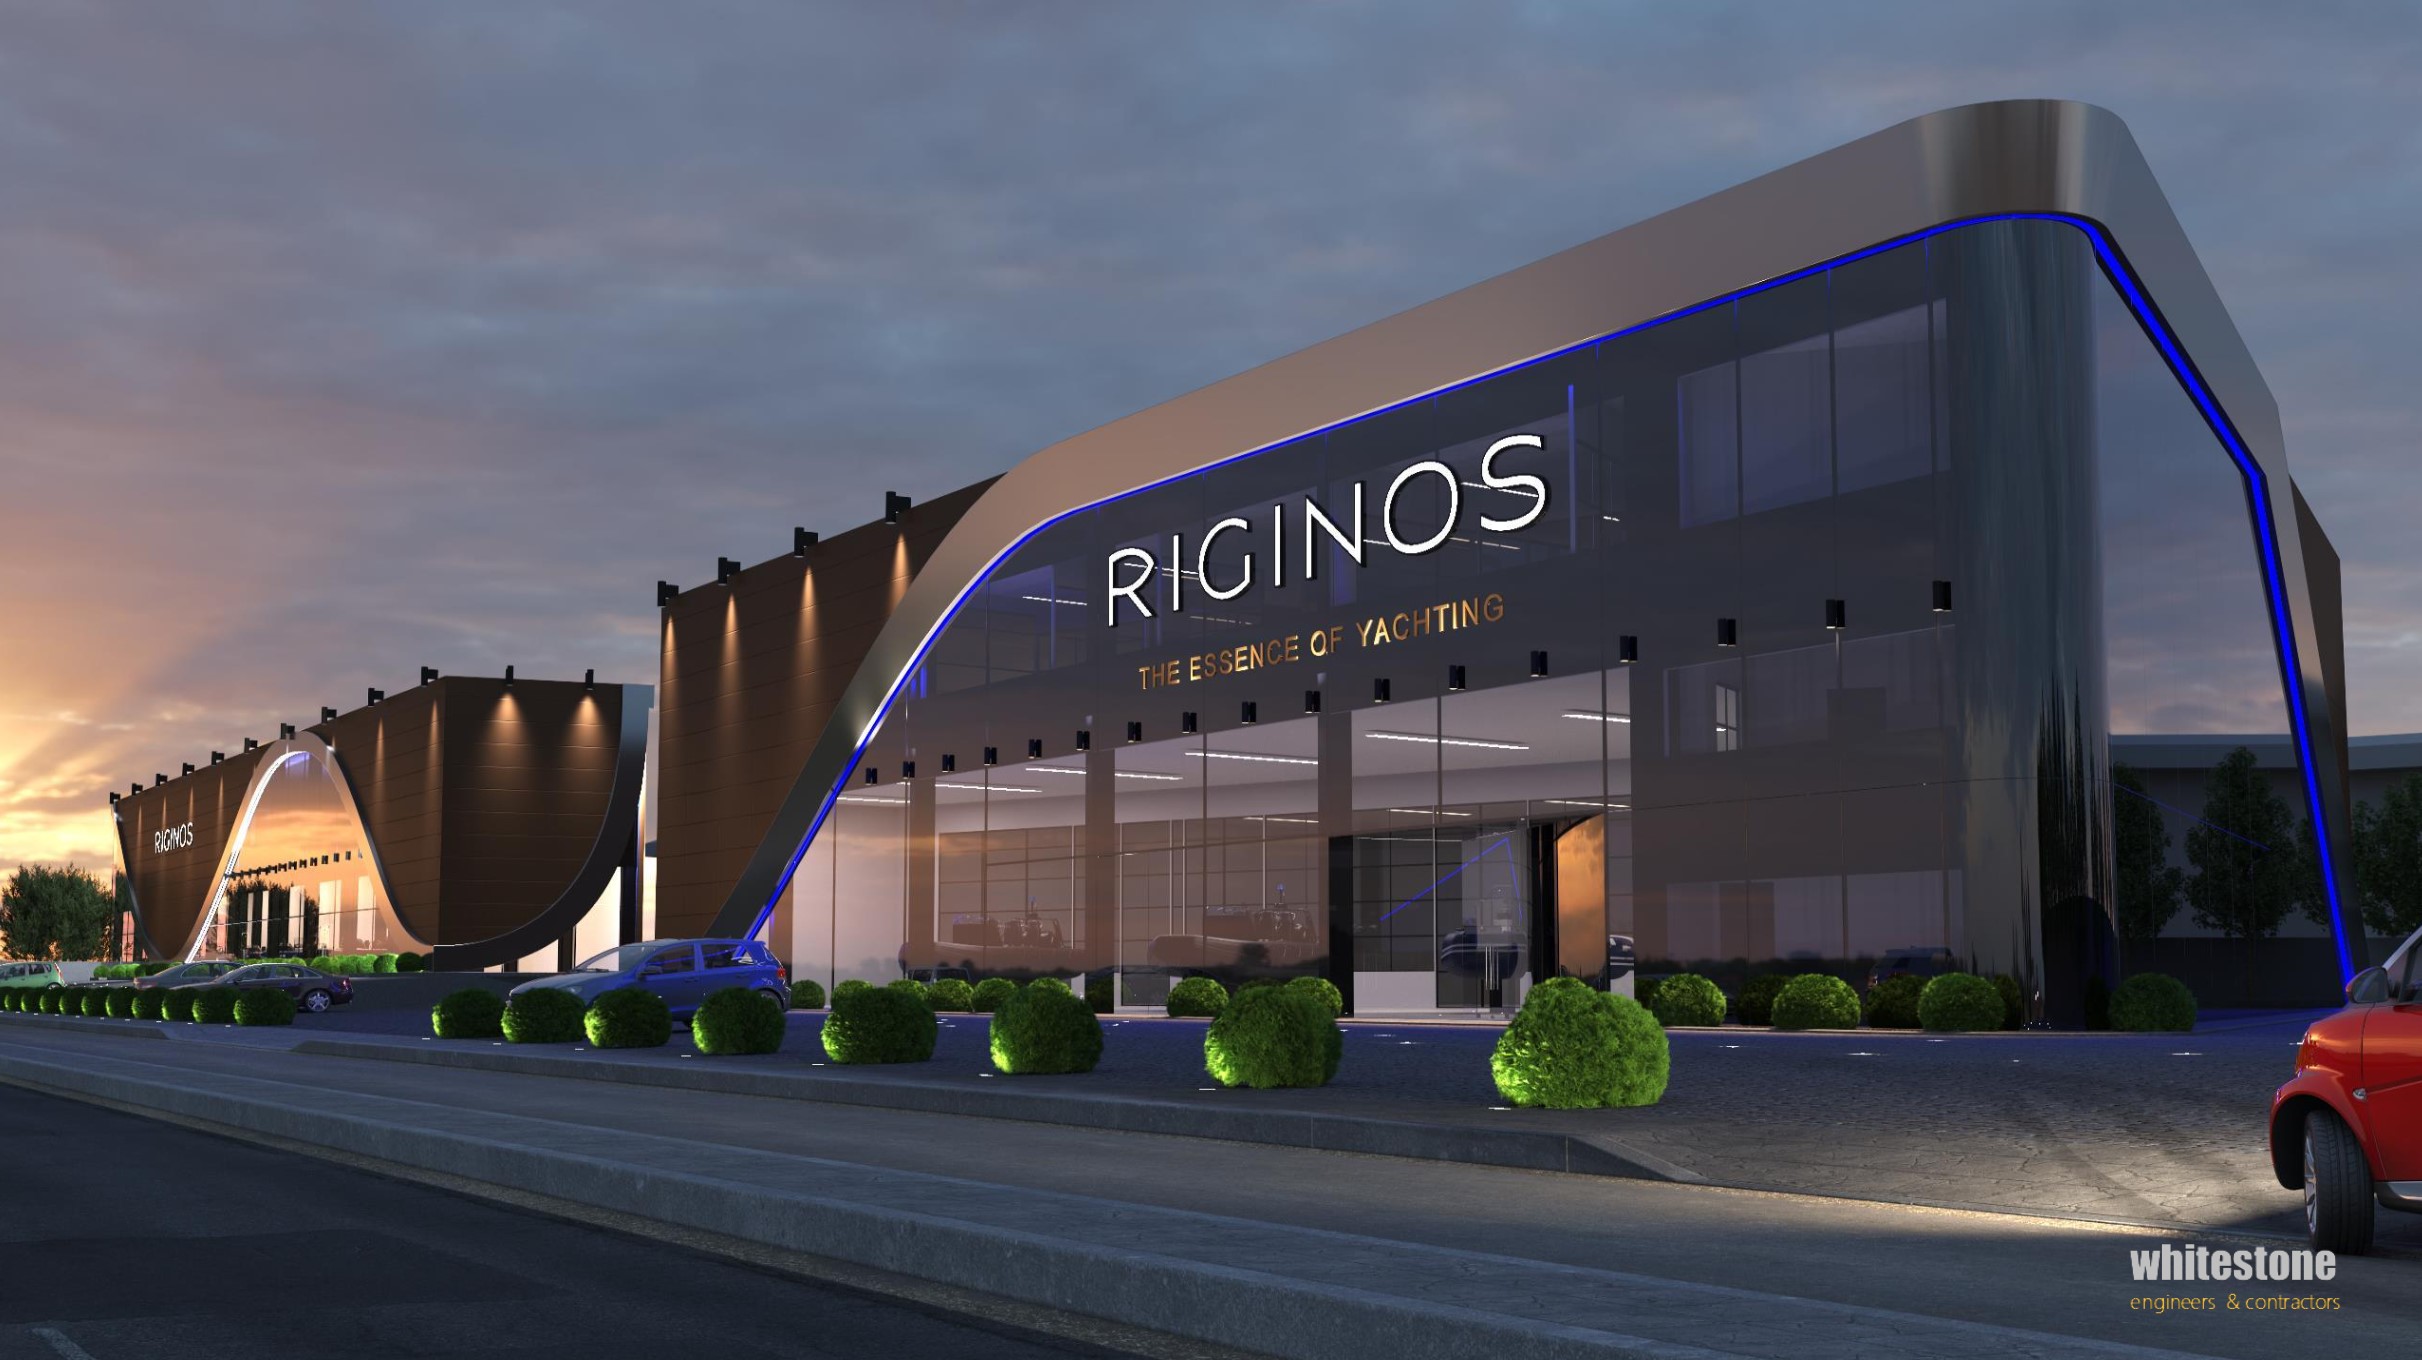 RIGINOS Yachts declares €7.5M in new investments